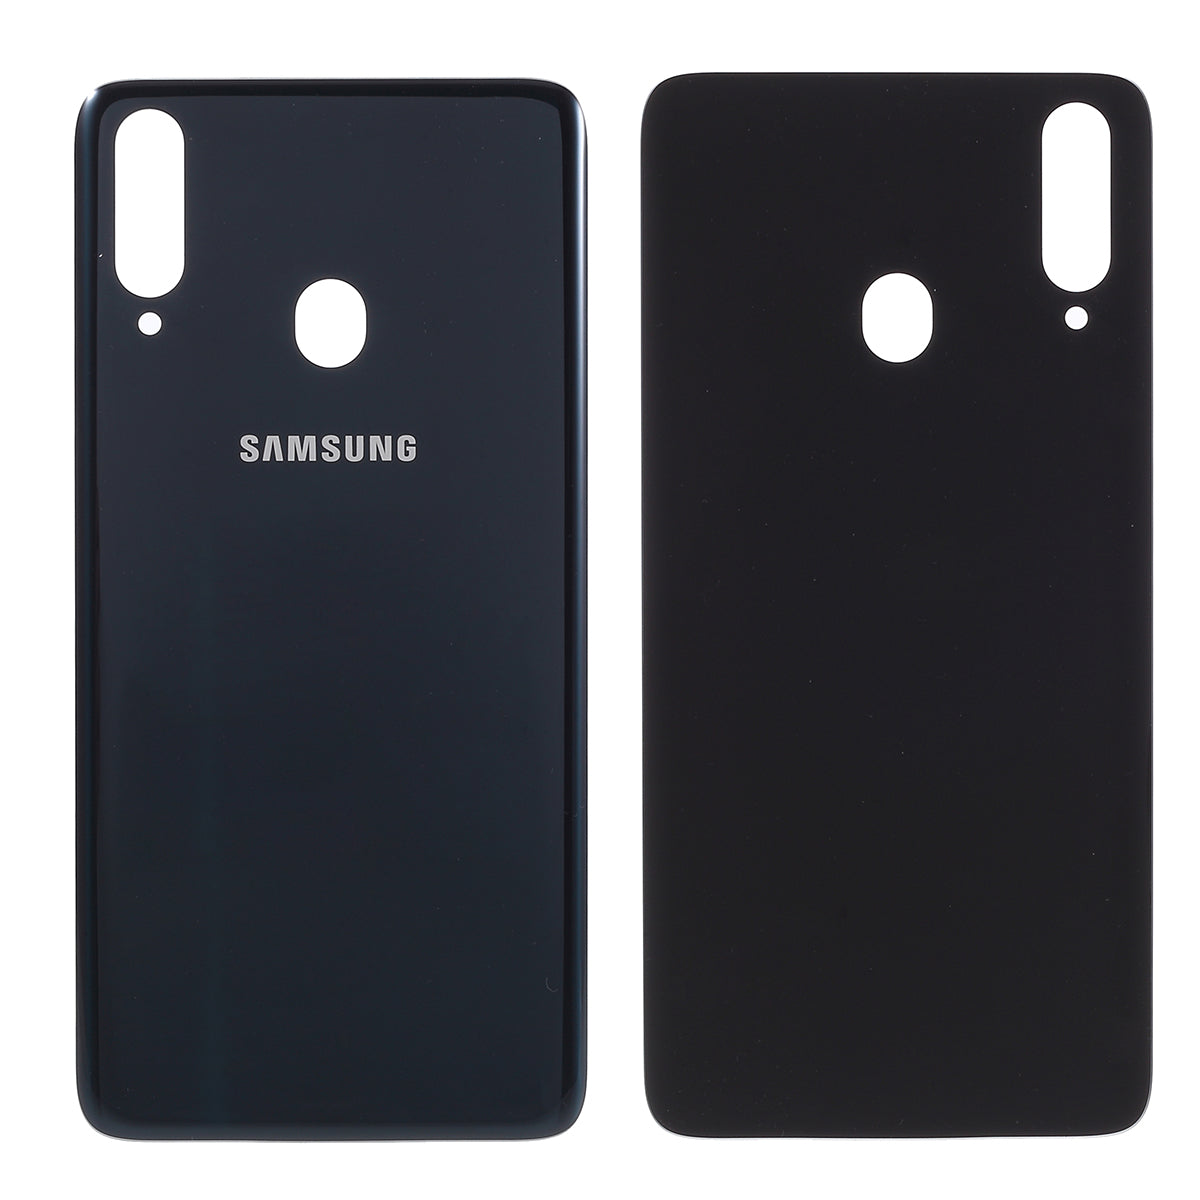 OEM Plastic Battery Door Housing Cover for Samsung Galaxy A20s SM-A207F - Black